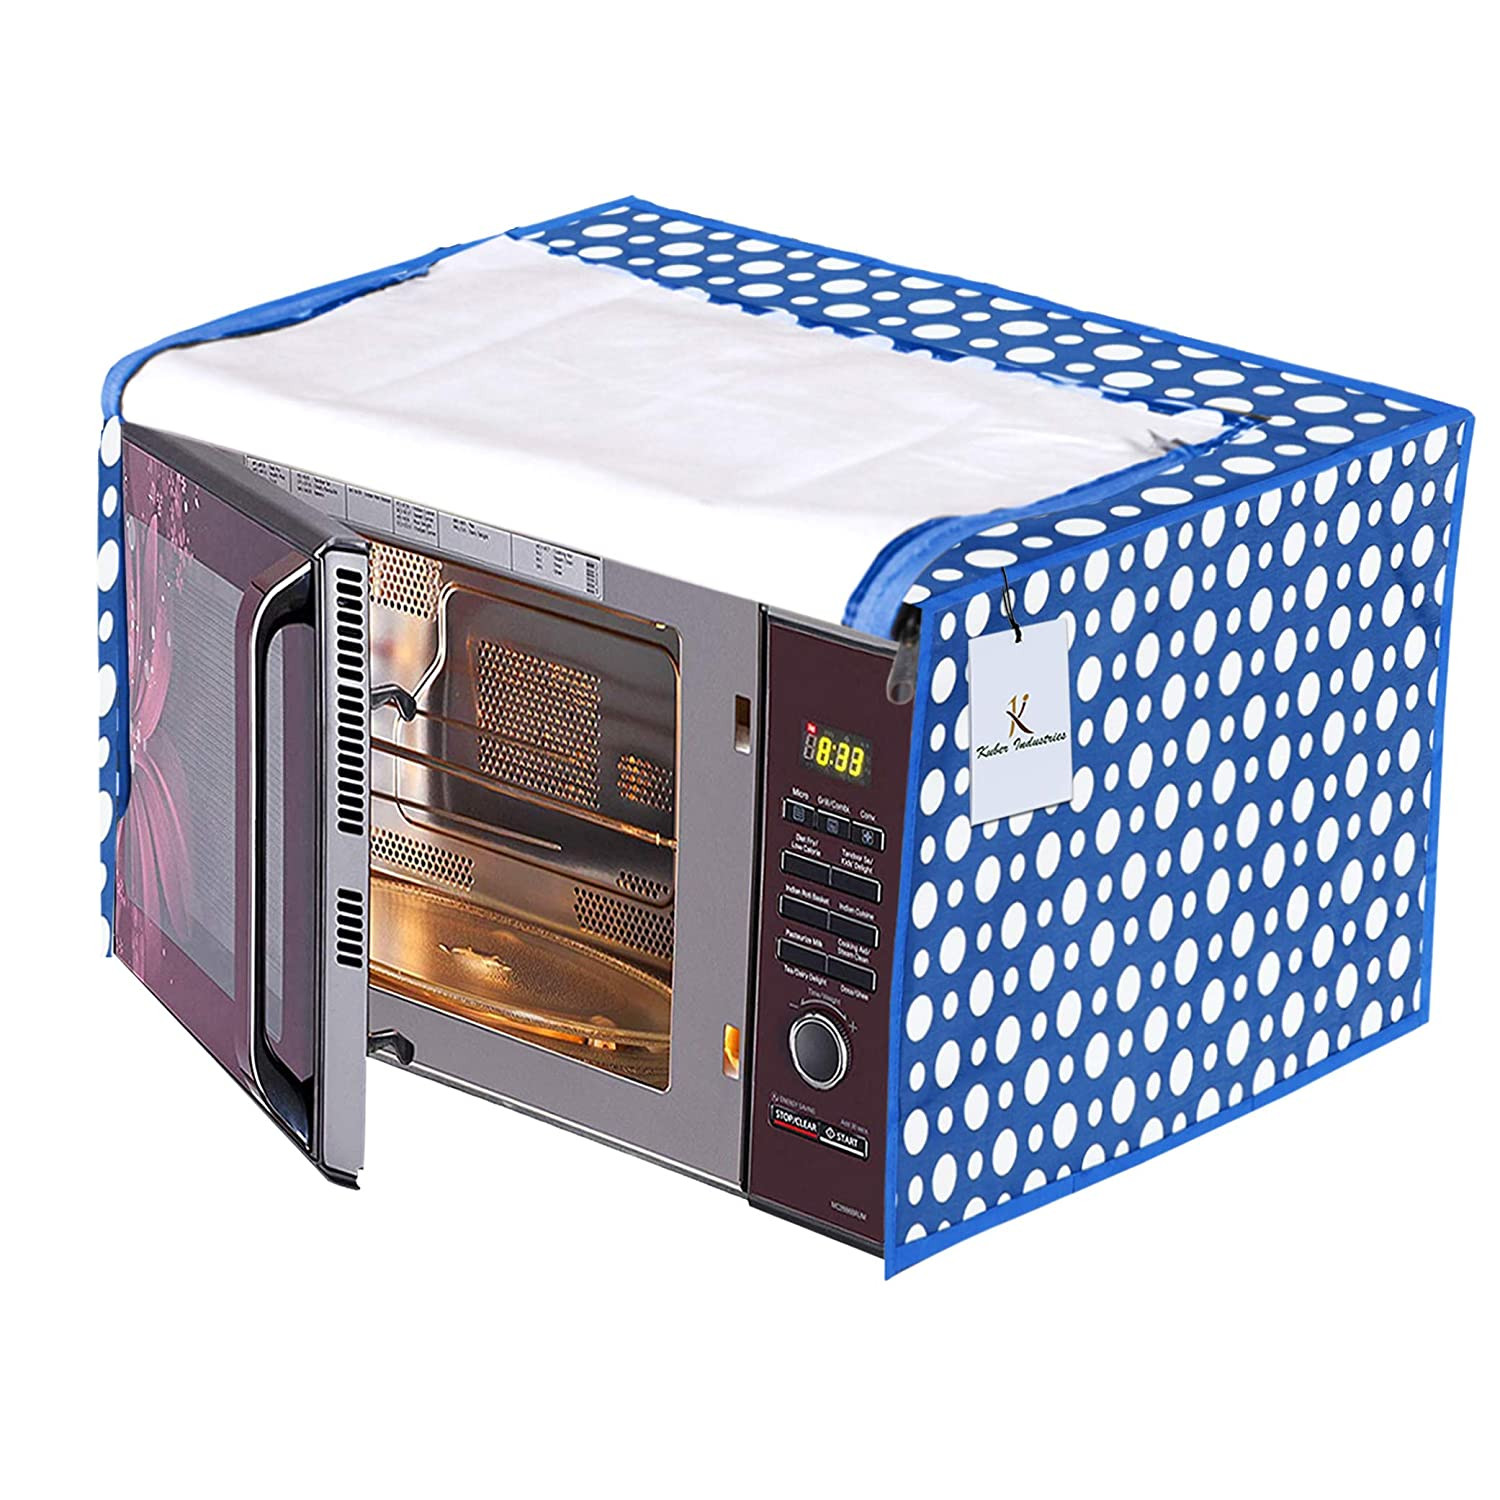 Kuber Industries PVC Dot Printed Microwave Oven Cover,23 Ltr. (Blue)-HS43KUBMART26019